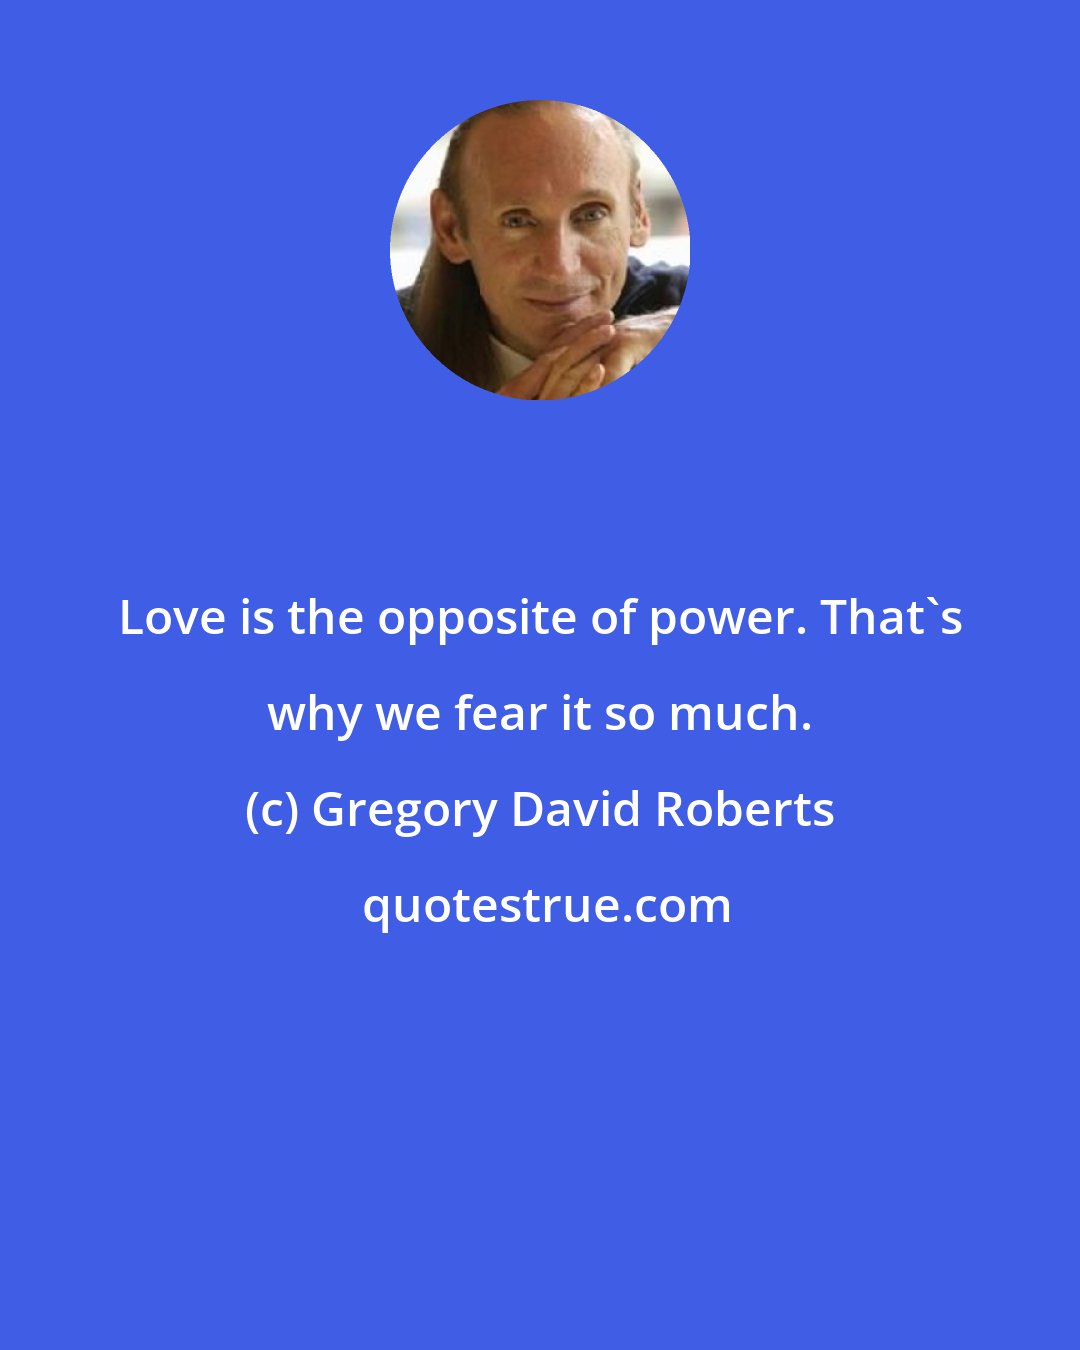 Gregory David Roberts: Love is the opposite of power. That's why we fear it so much.